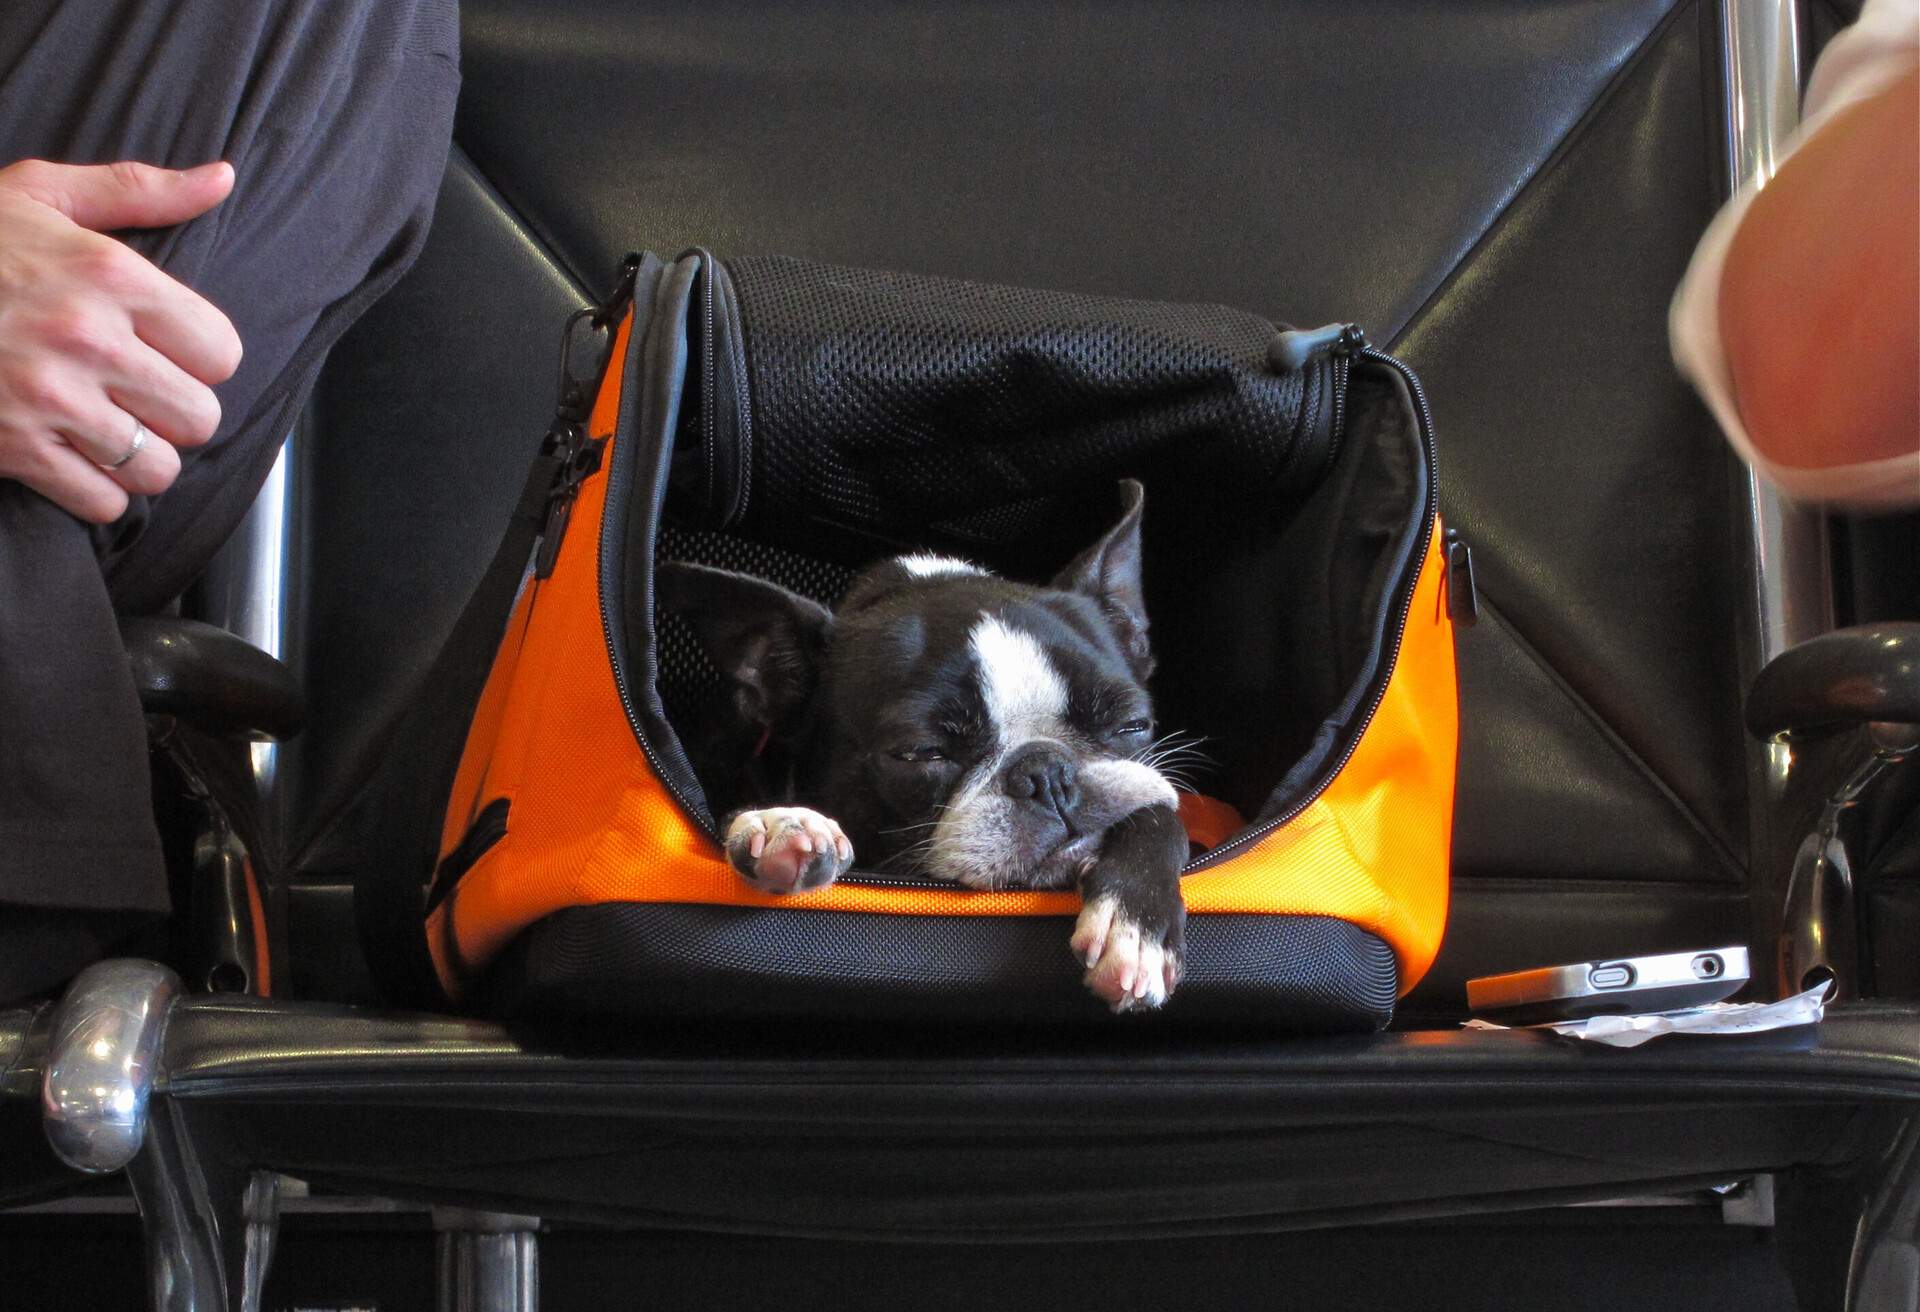 Dog in cabin, airplane pet policy